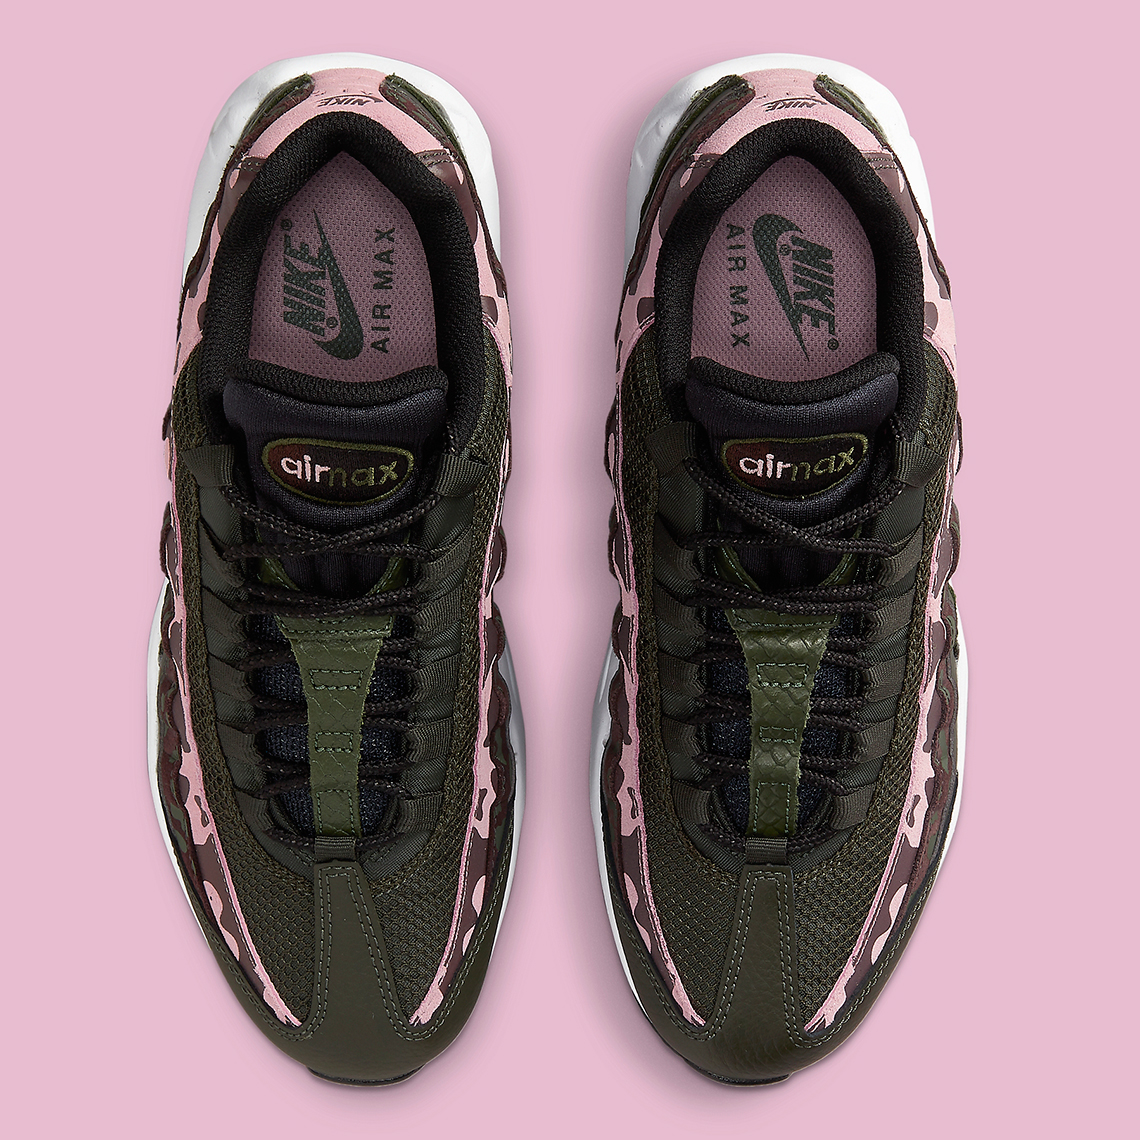 Nike Air Max 95 Camo Olive Pink DN5462-200 | SneakerNews.com